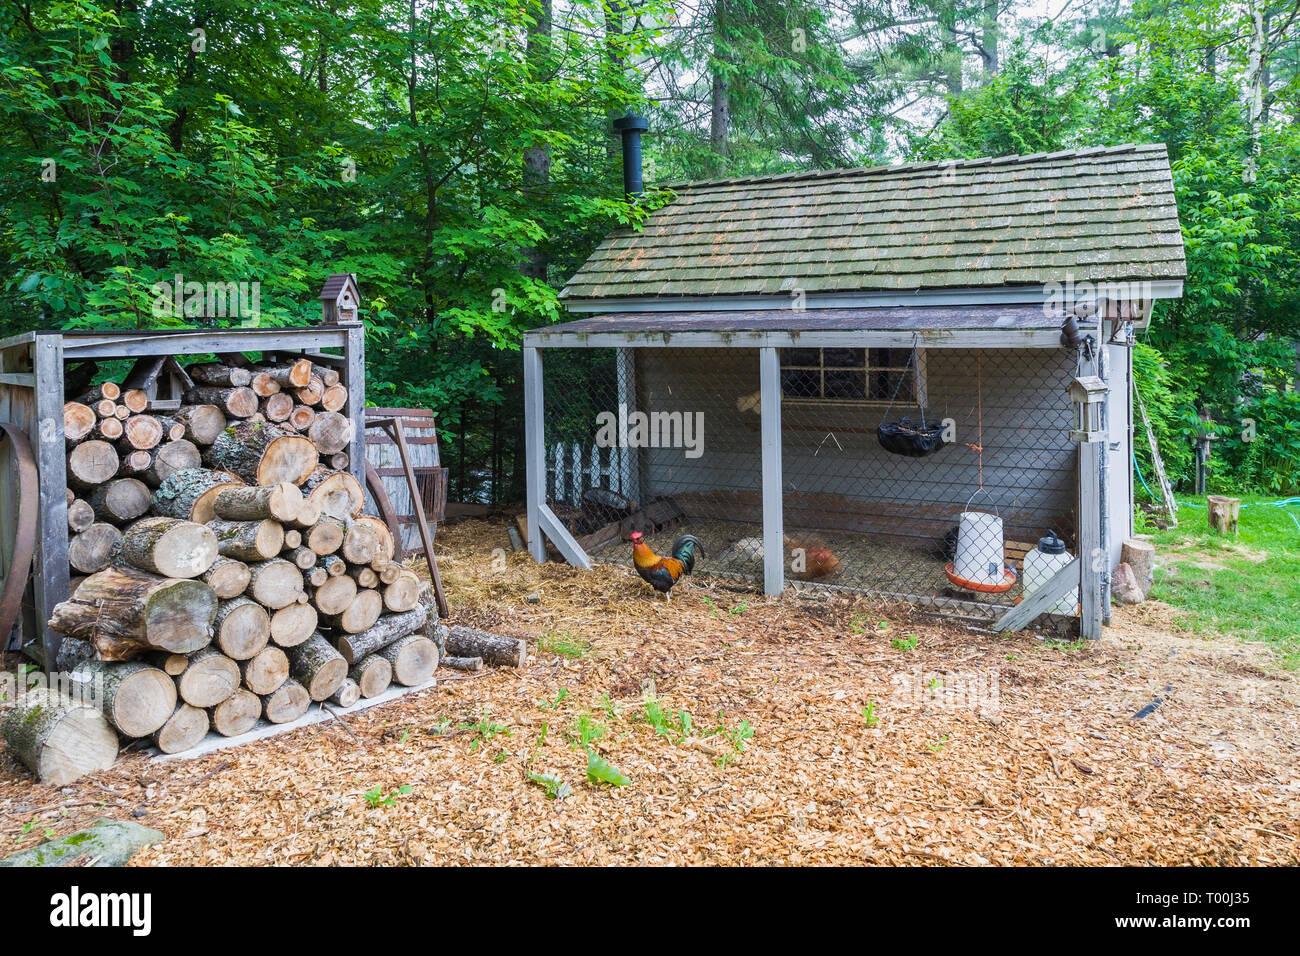 Chicken coop with cedar shingles roof next to pile of stacked firewood in residential backyard in early summer Stock Photo